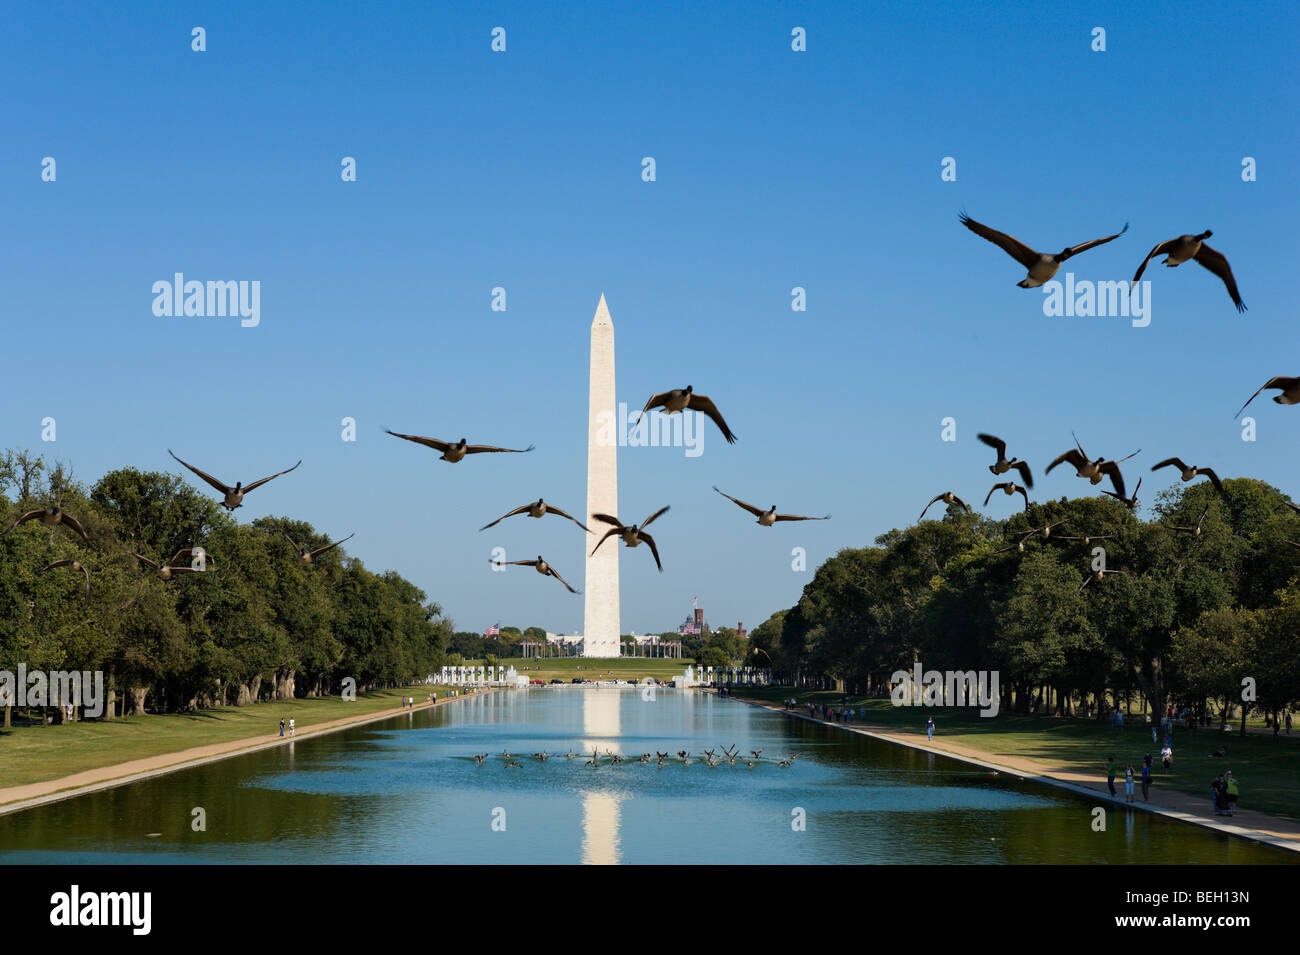 A flock of geese taking off from the Reflecting Pool with the Washington Monument behind, Washington DC, USA Stock Photo